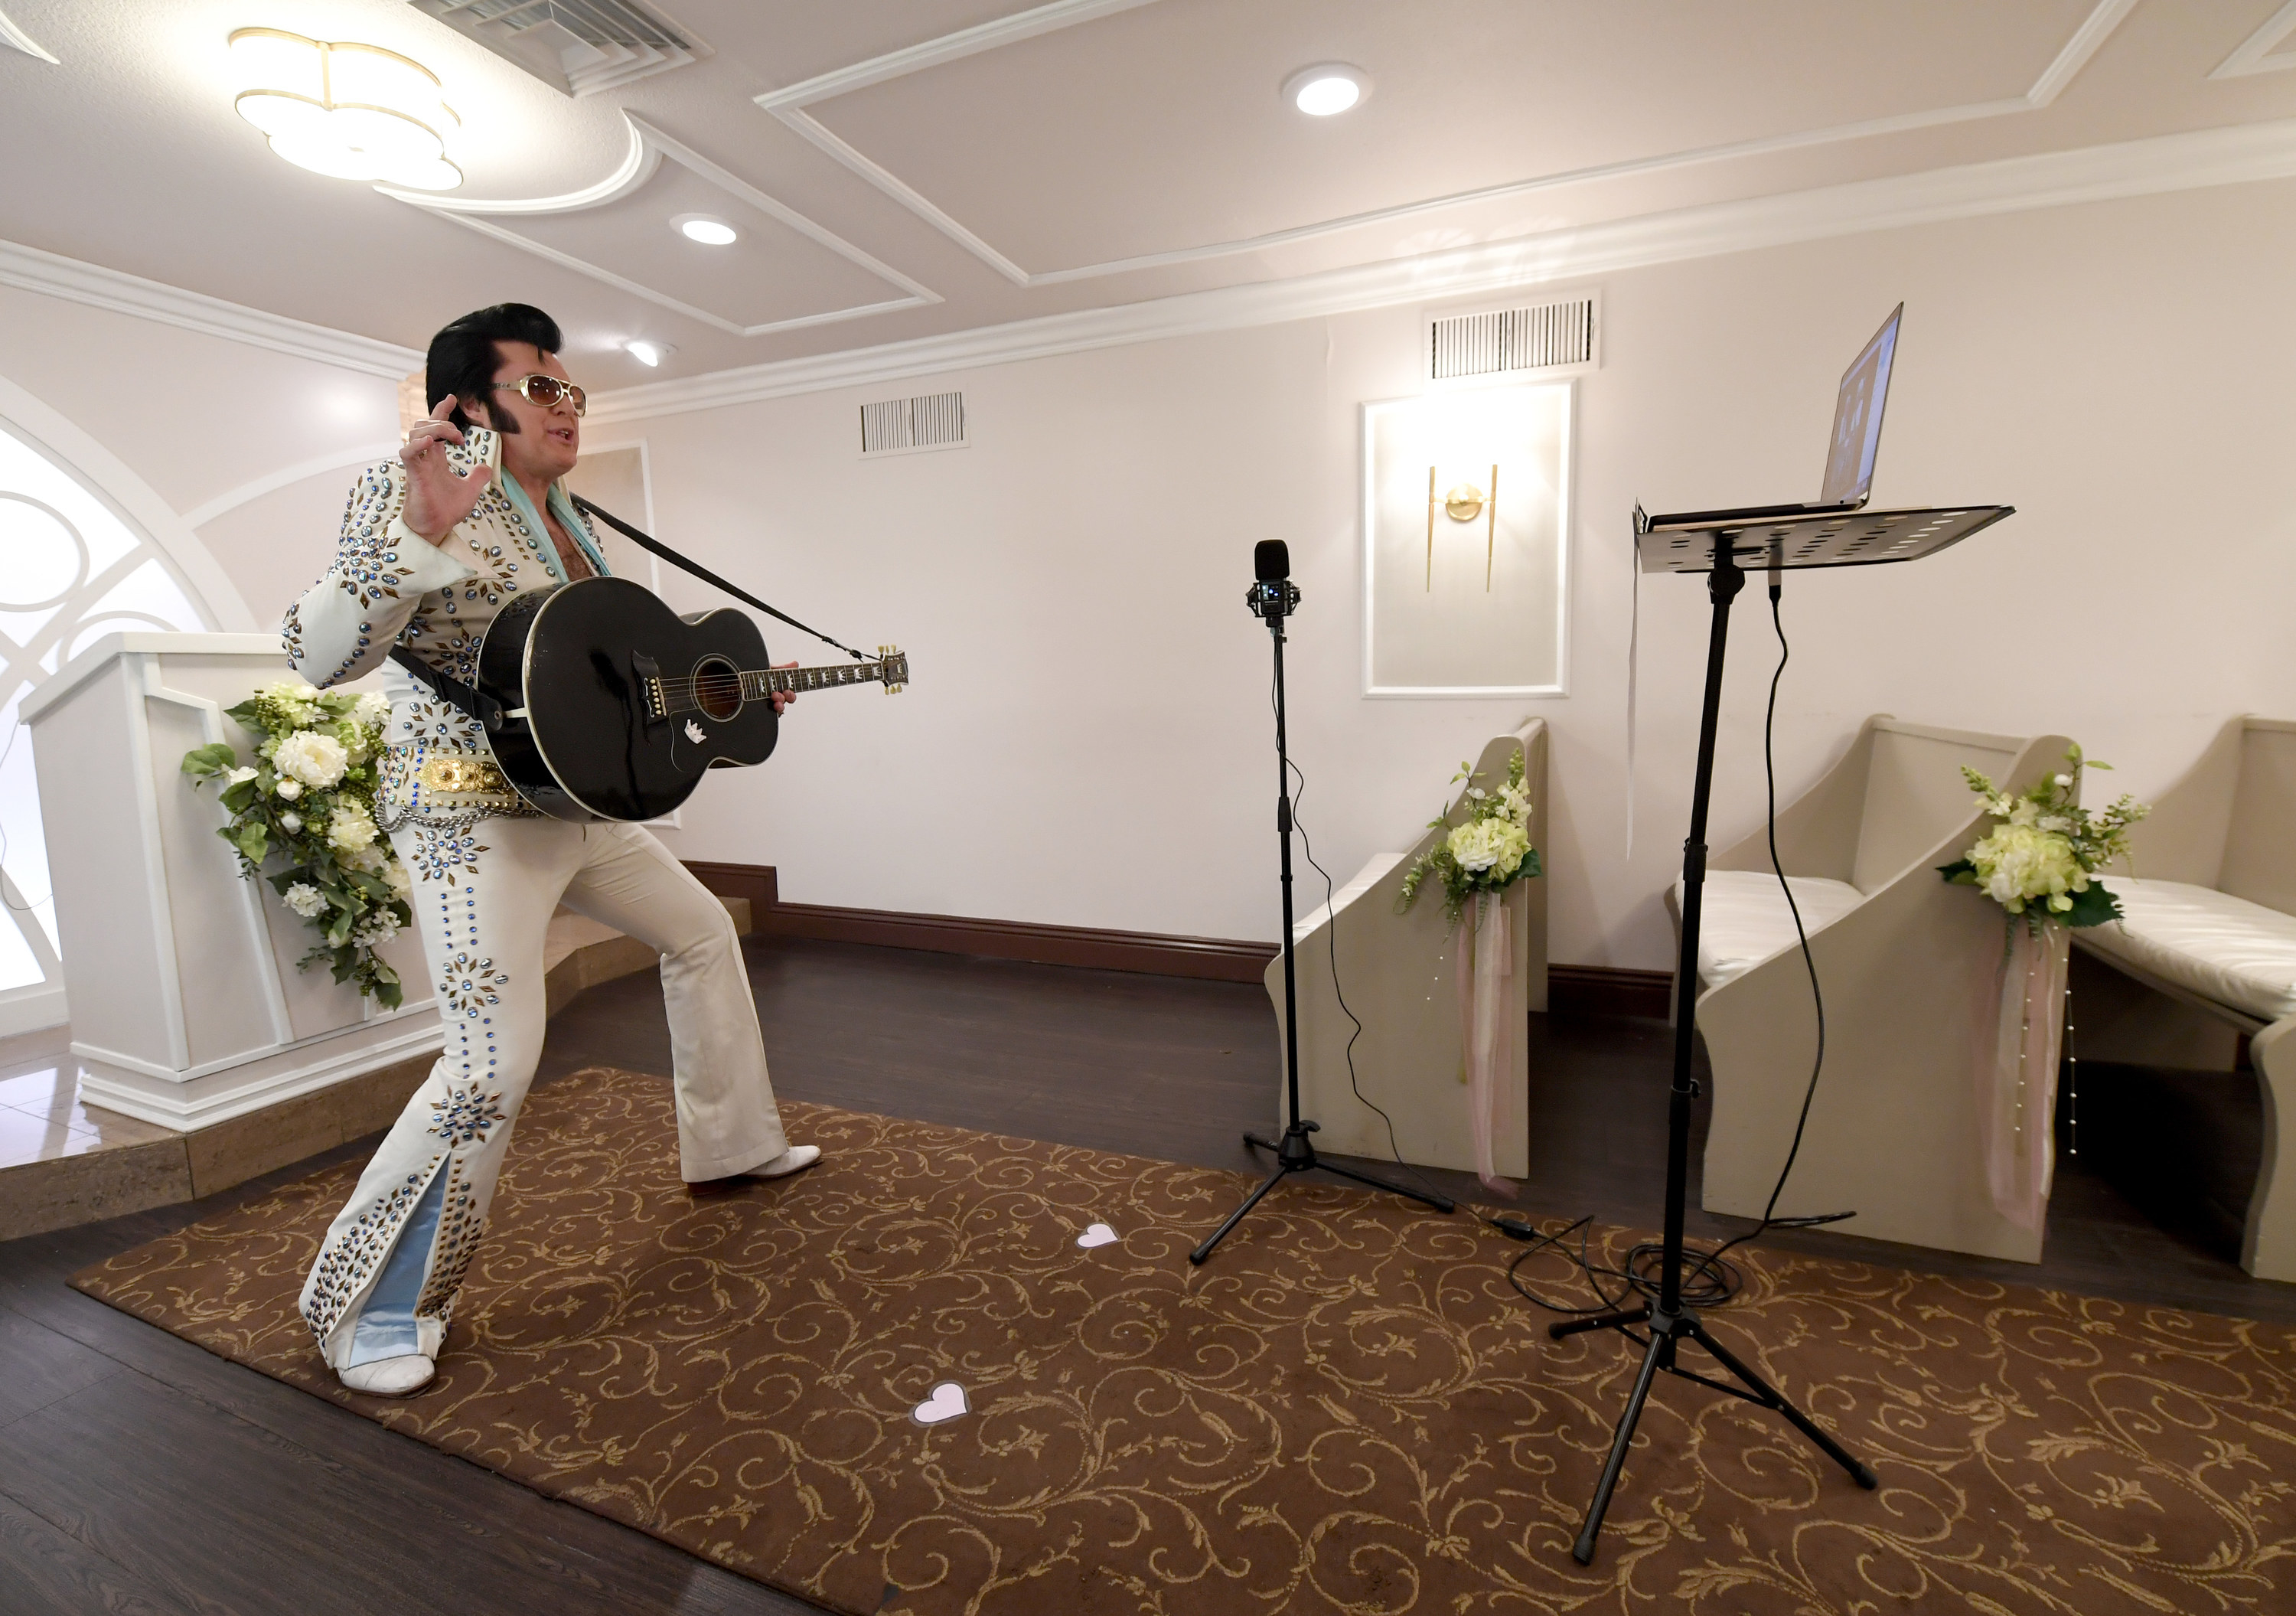 Elvis impersonator performing in a chapel